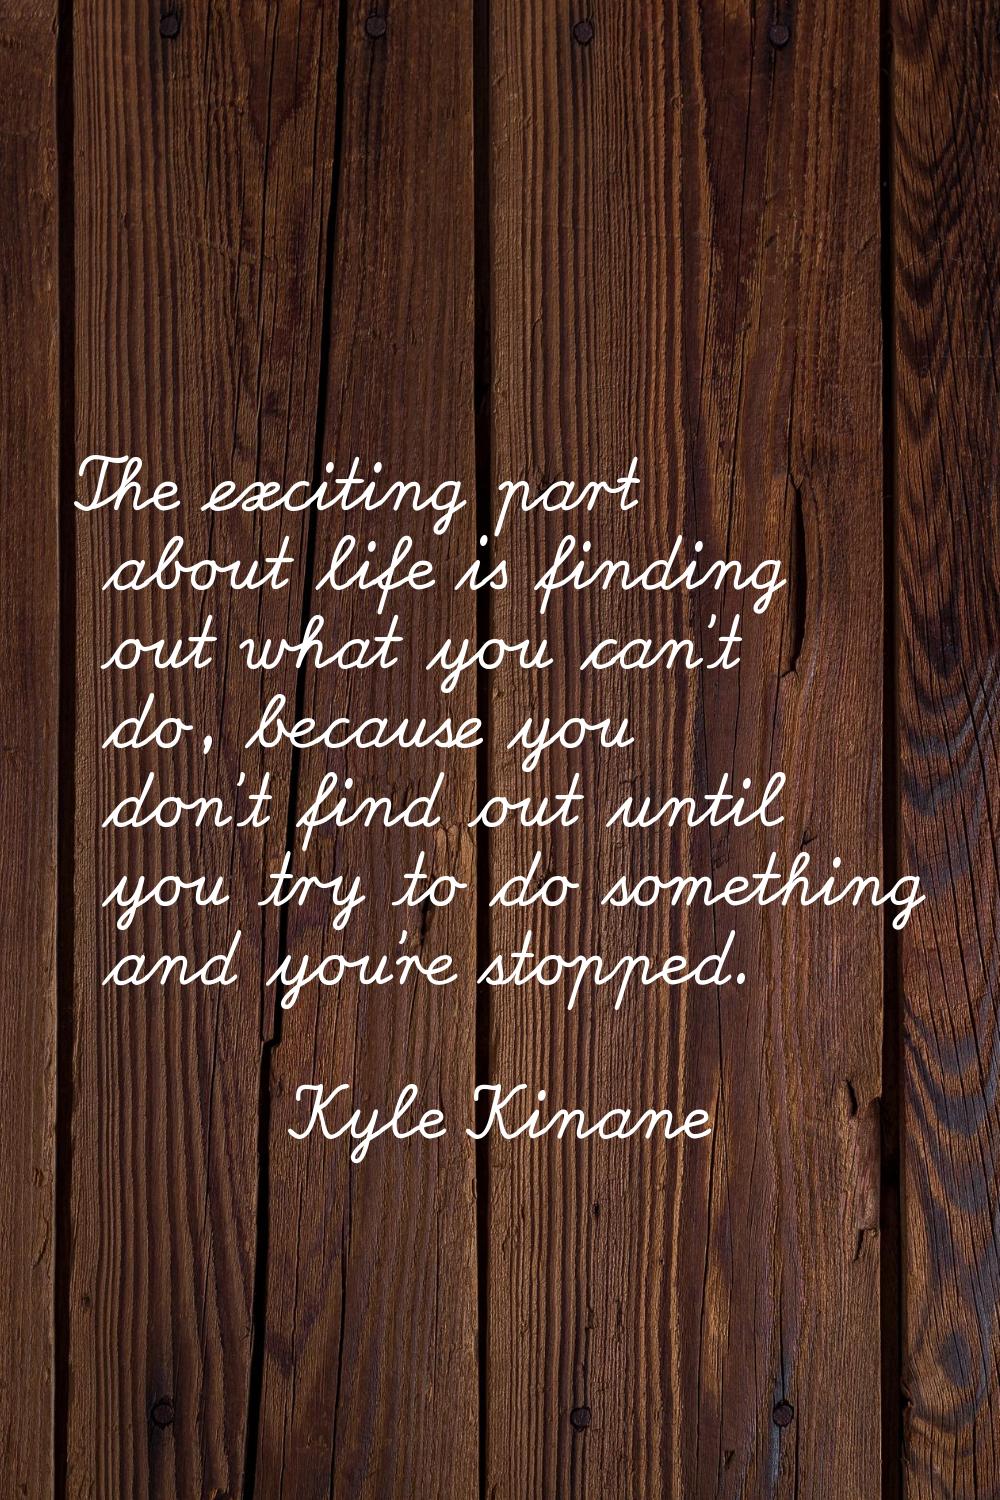 The exciting part about life is finding out what you can't do, because you don't find out until you